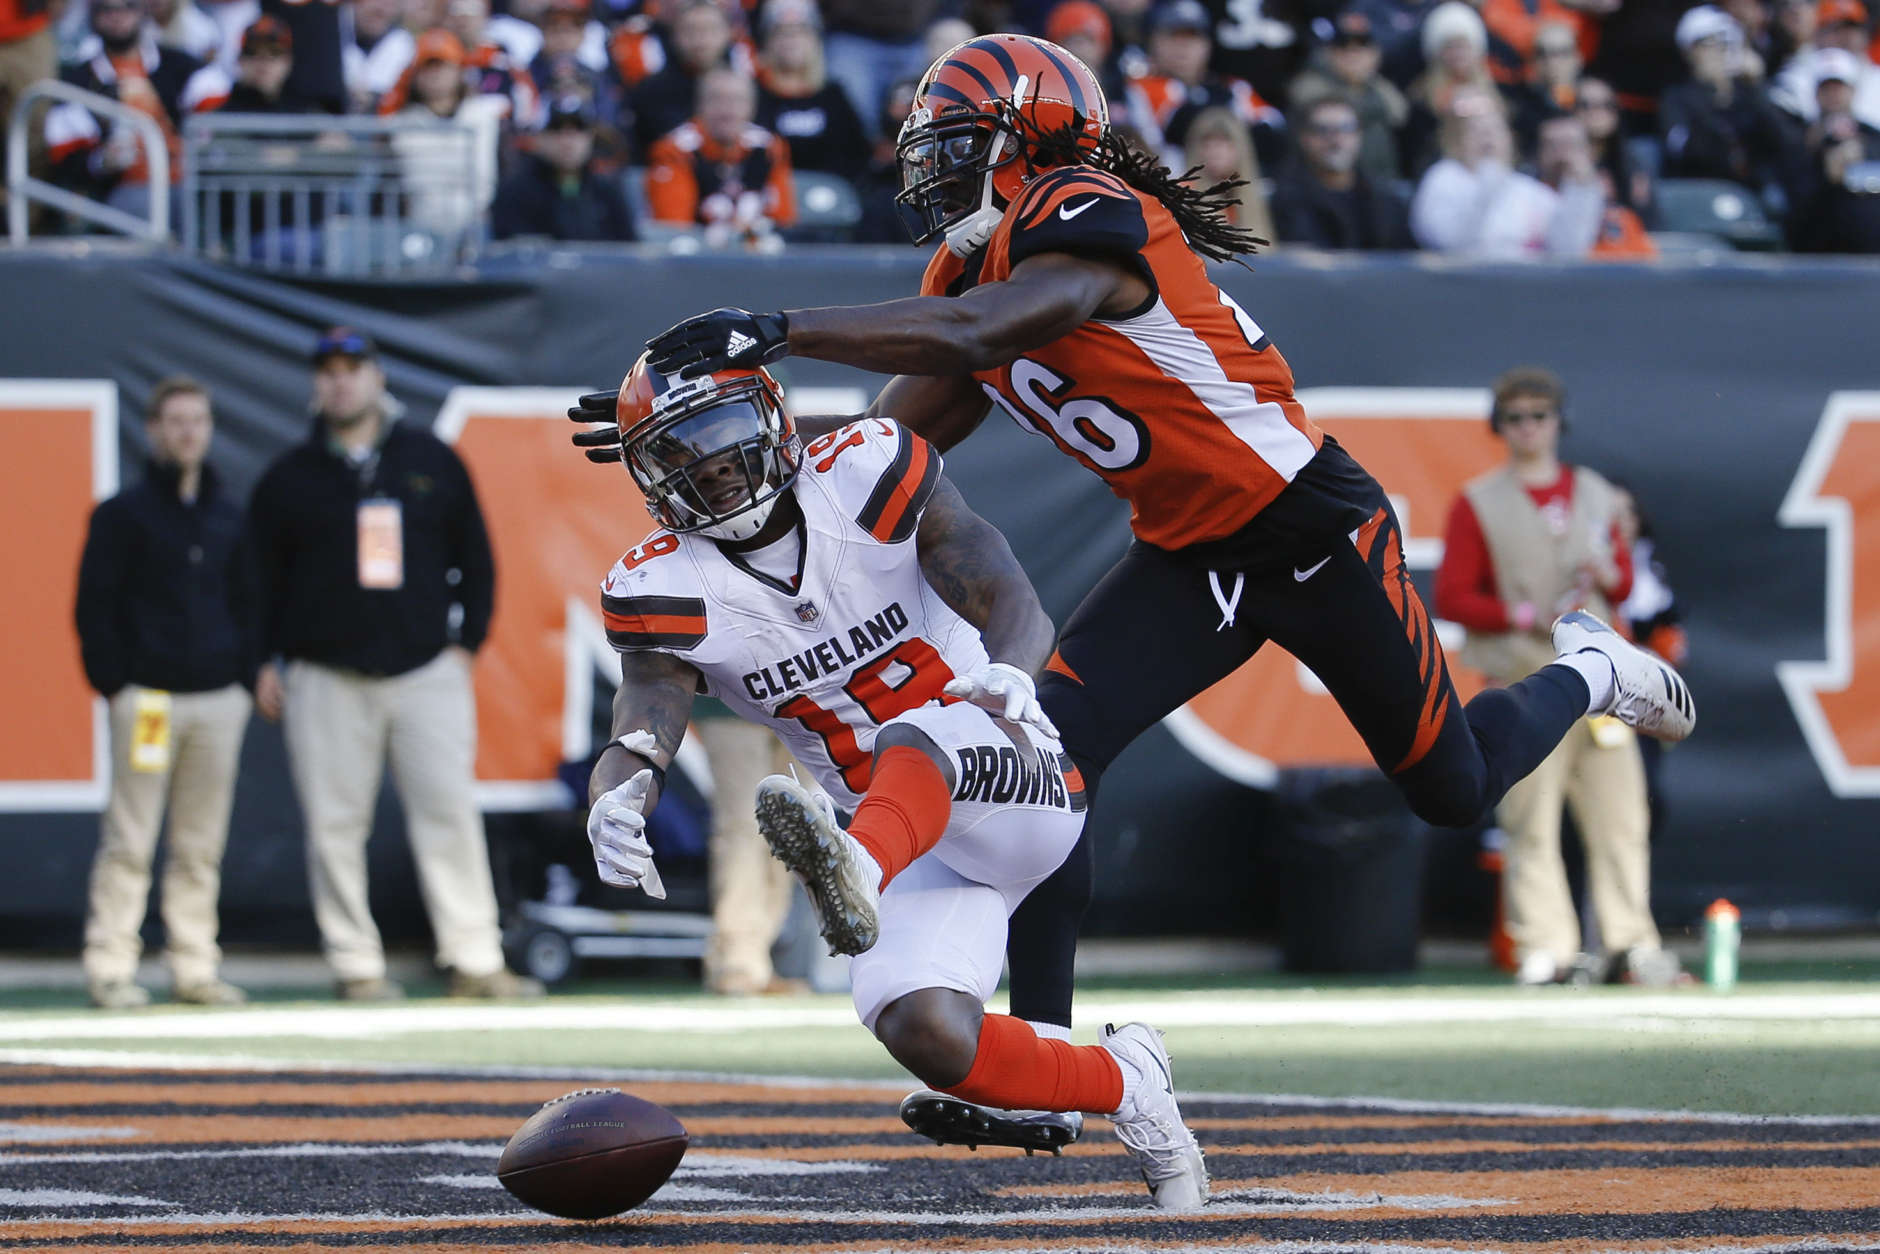 Cleveland Browns wide receiver Corey Coleman (19) drops a pass against Cincinnati Bengals cornerback Josh Shaw (26) in the second half of an NFL football game, Sunday, Nov. 26, 2017, in Cincinnati. (AP Photo/Frank Victores)